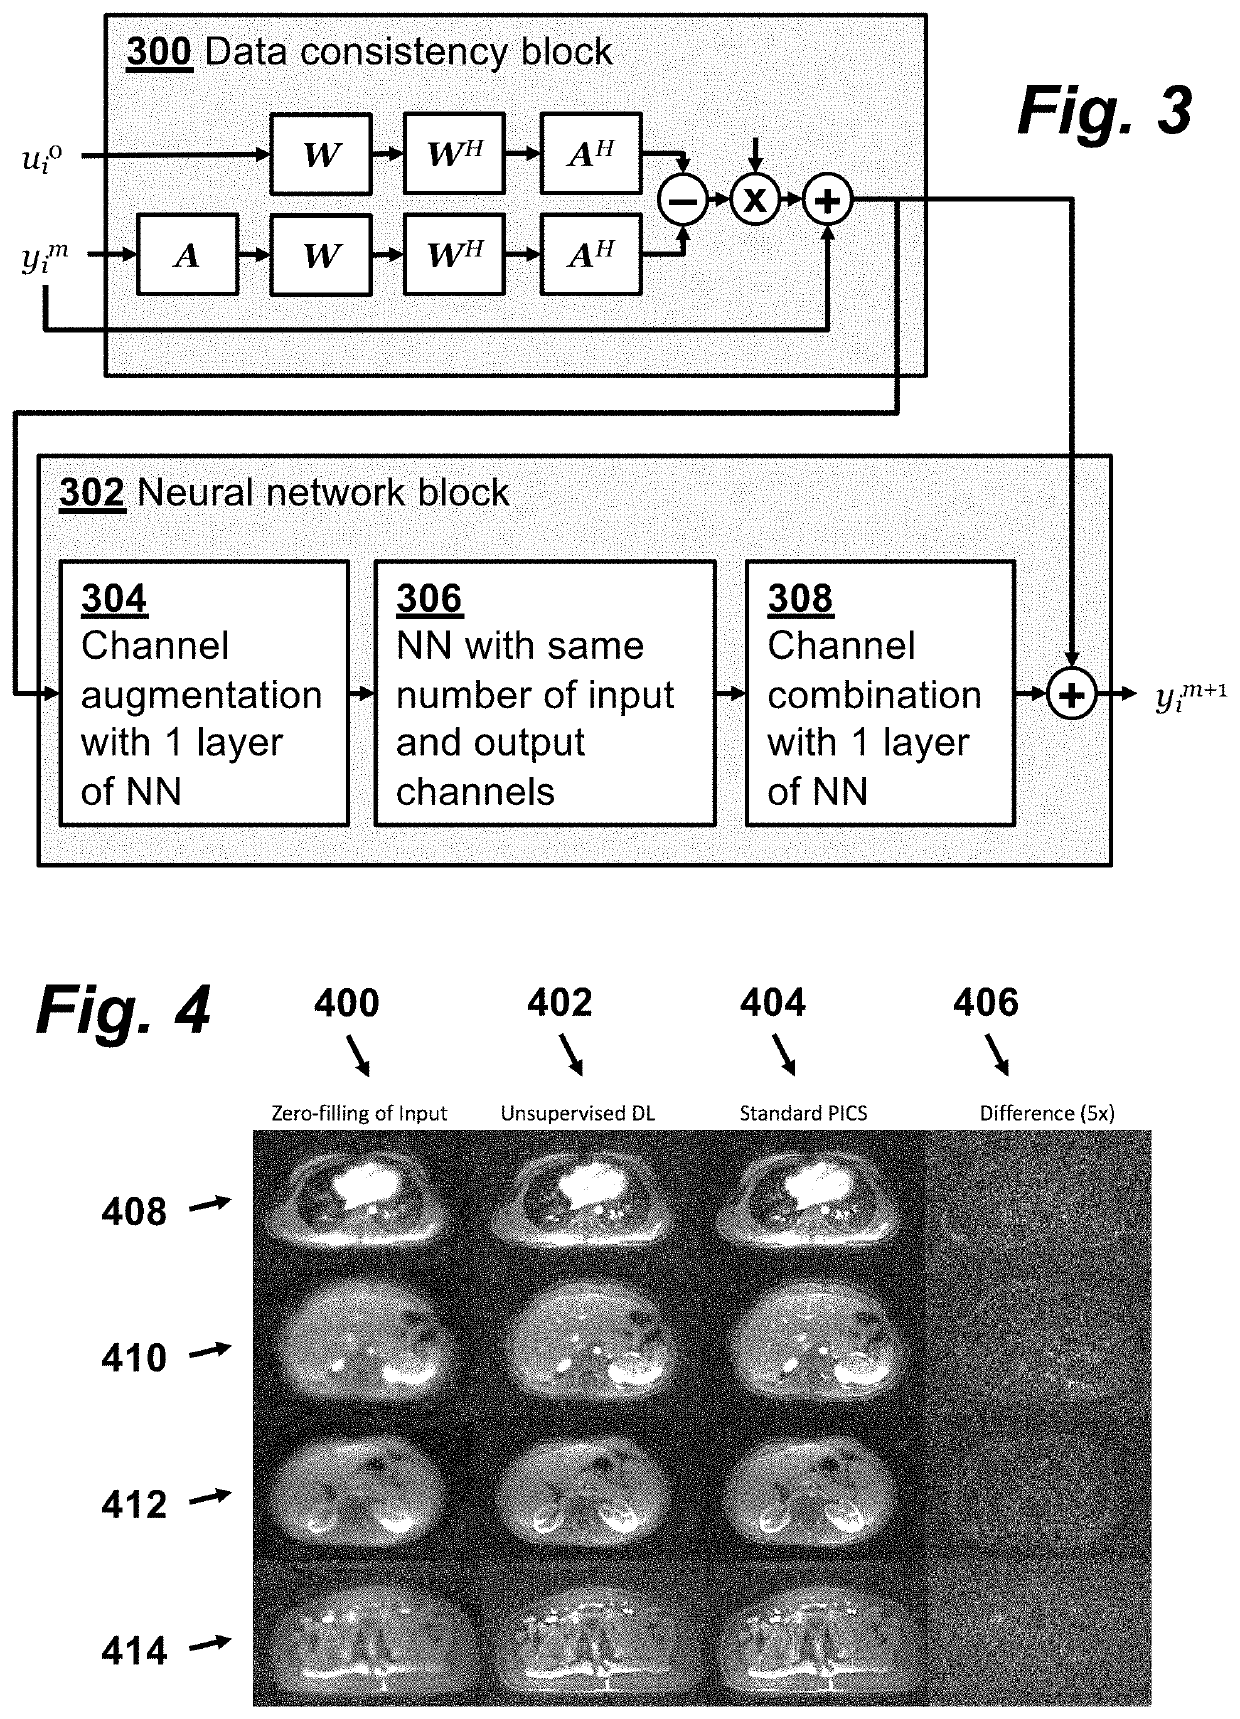 Method for Performing Magnetic Resonance Imaging Reconstruction with Unsupervised Deep Learning